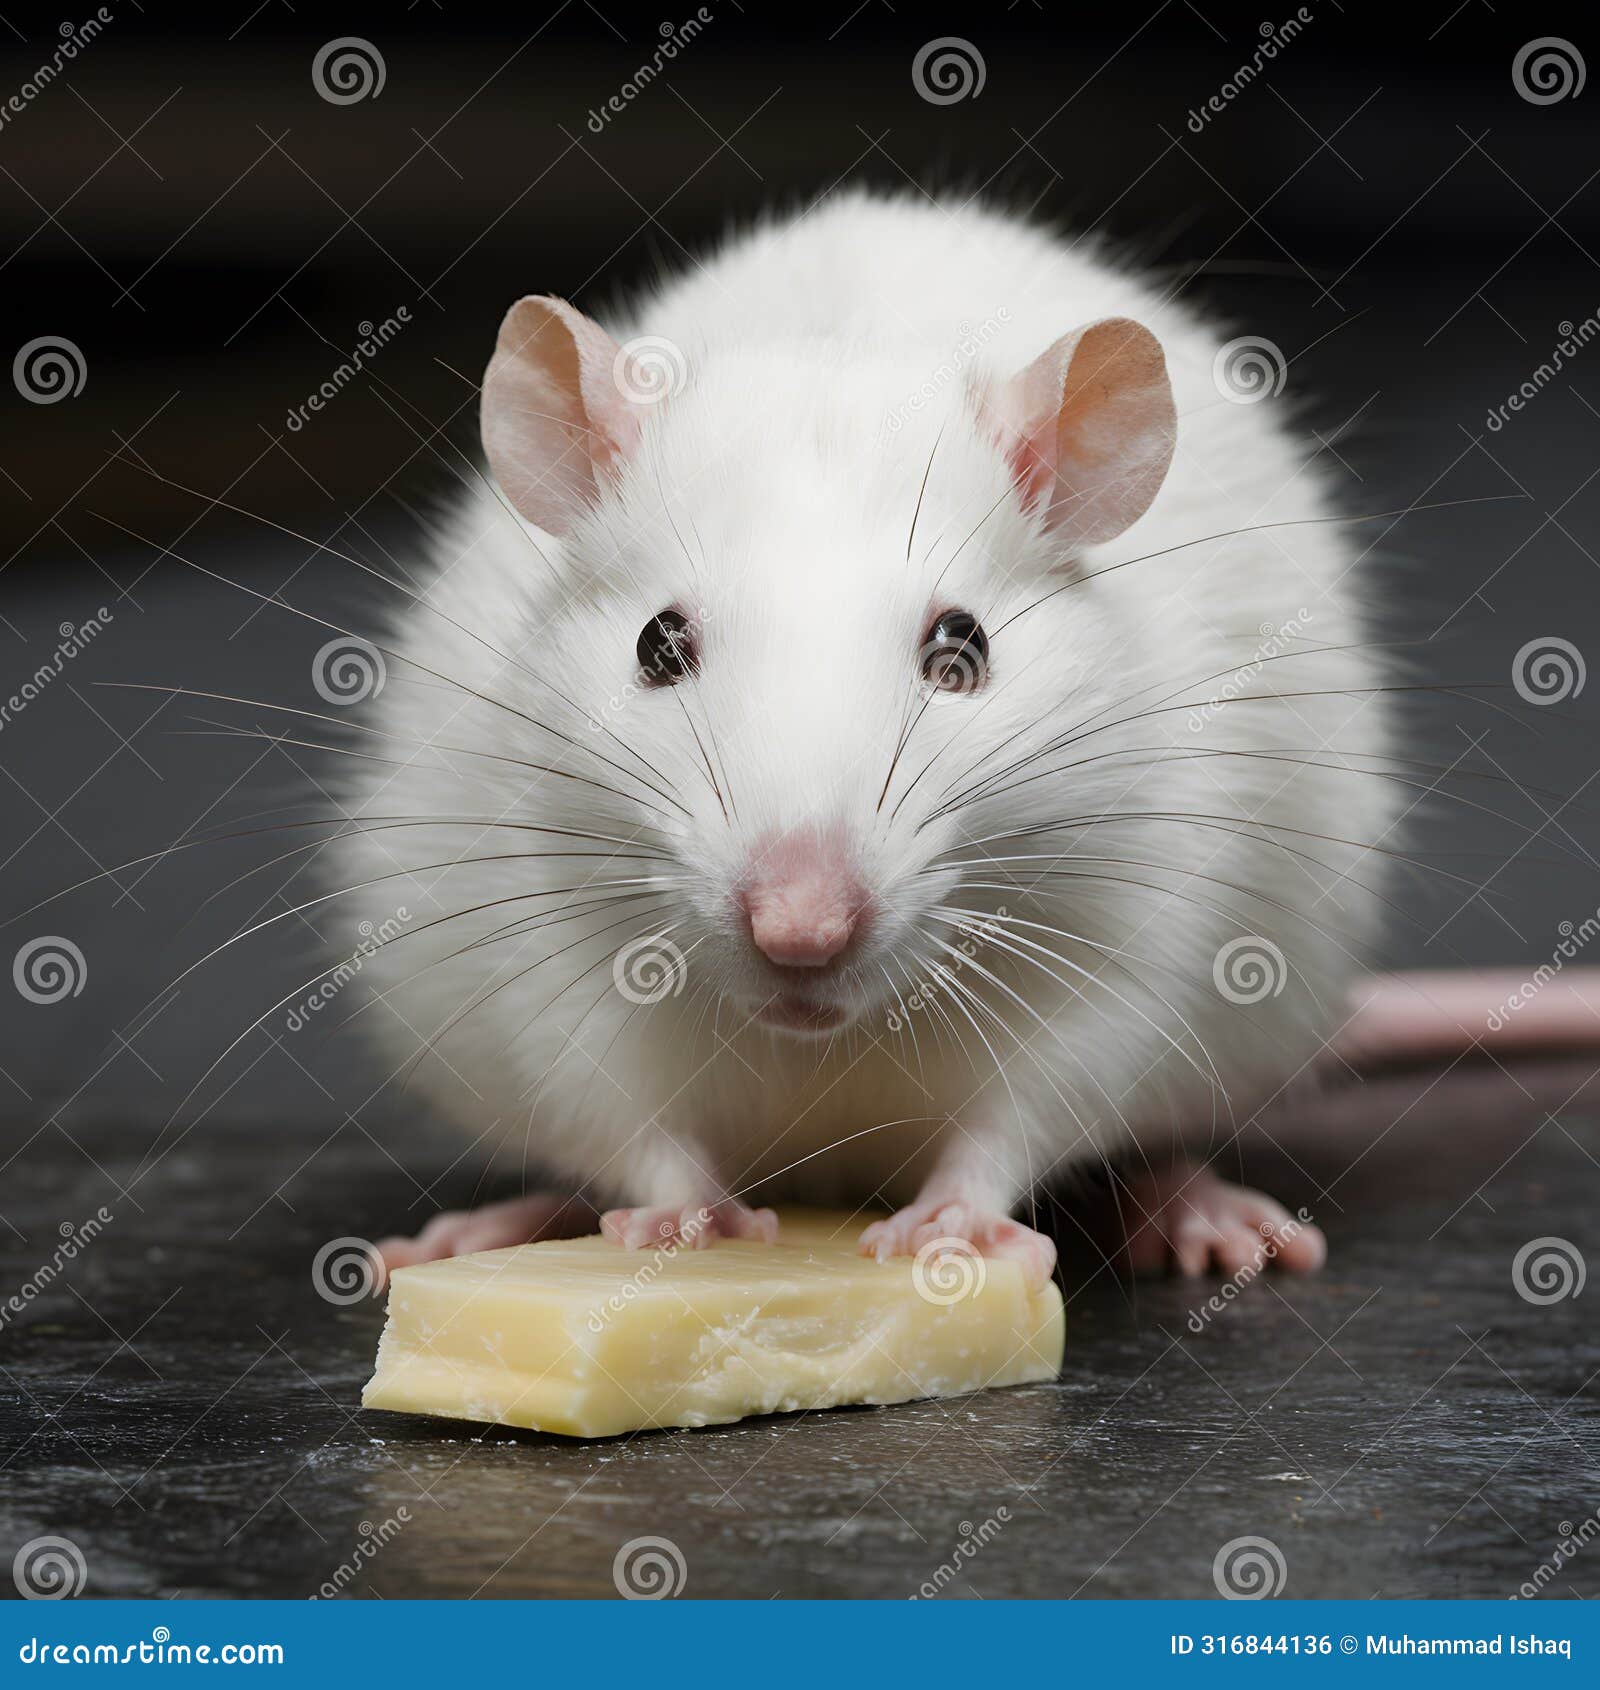 cute critter close up of white tame rat with cheese